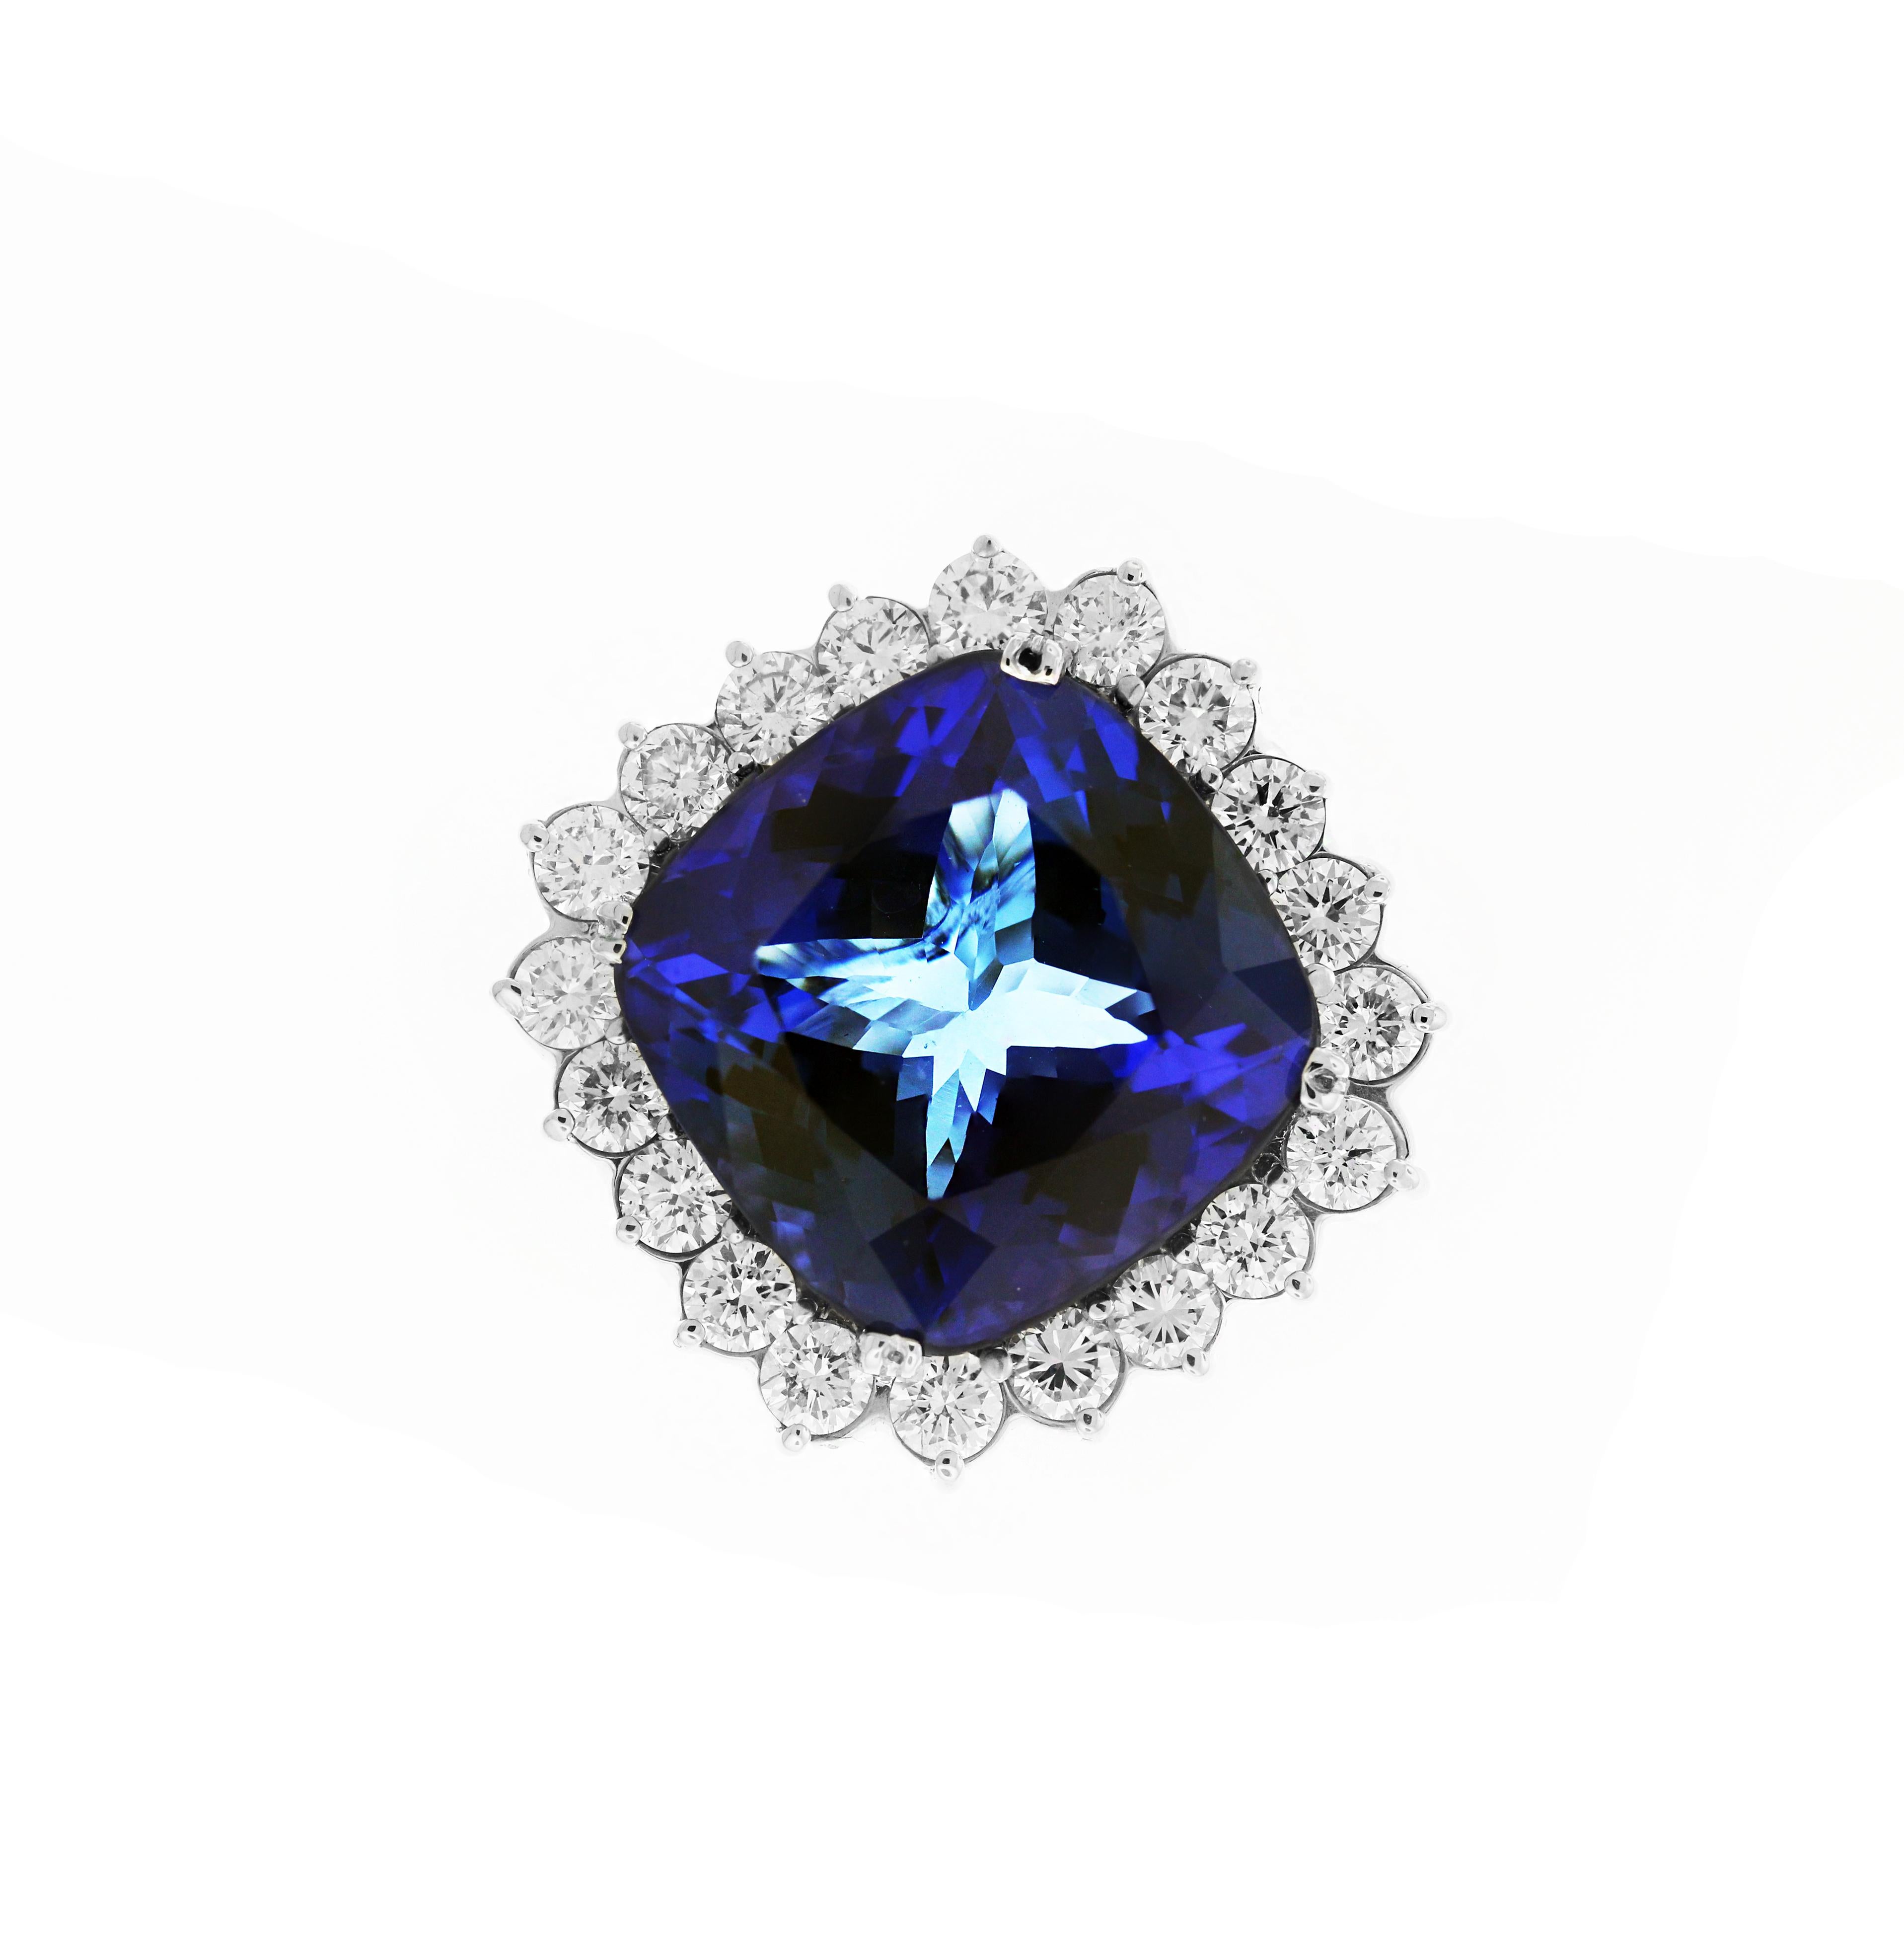 Platinum and Diamond Ring with 26.55 carat Tanzanite Center

Center Tanzanite is truly incredible. 26.55 carat and has unbelievable color. The tanzanite has royal blue and slight purple shade dependent on the light.

3.25 carat G color, VS clarity